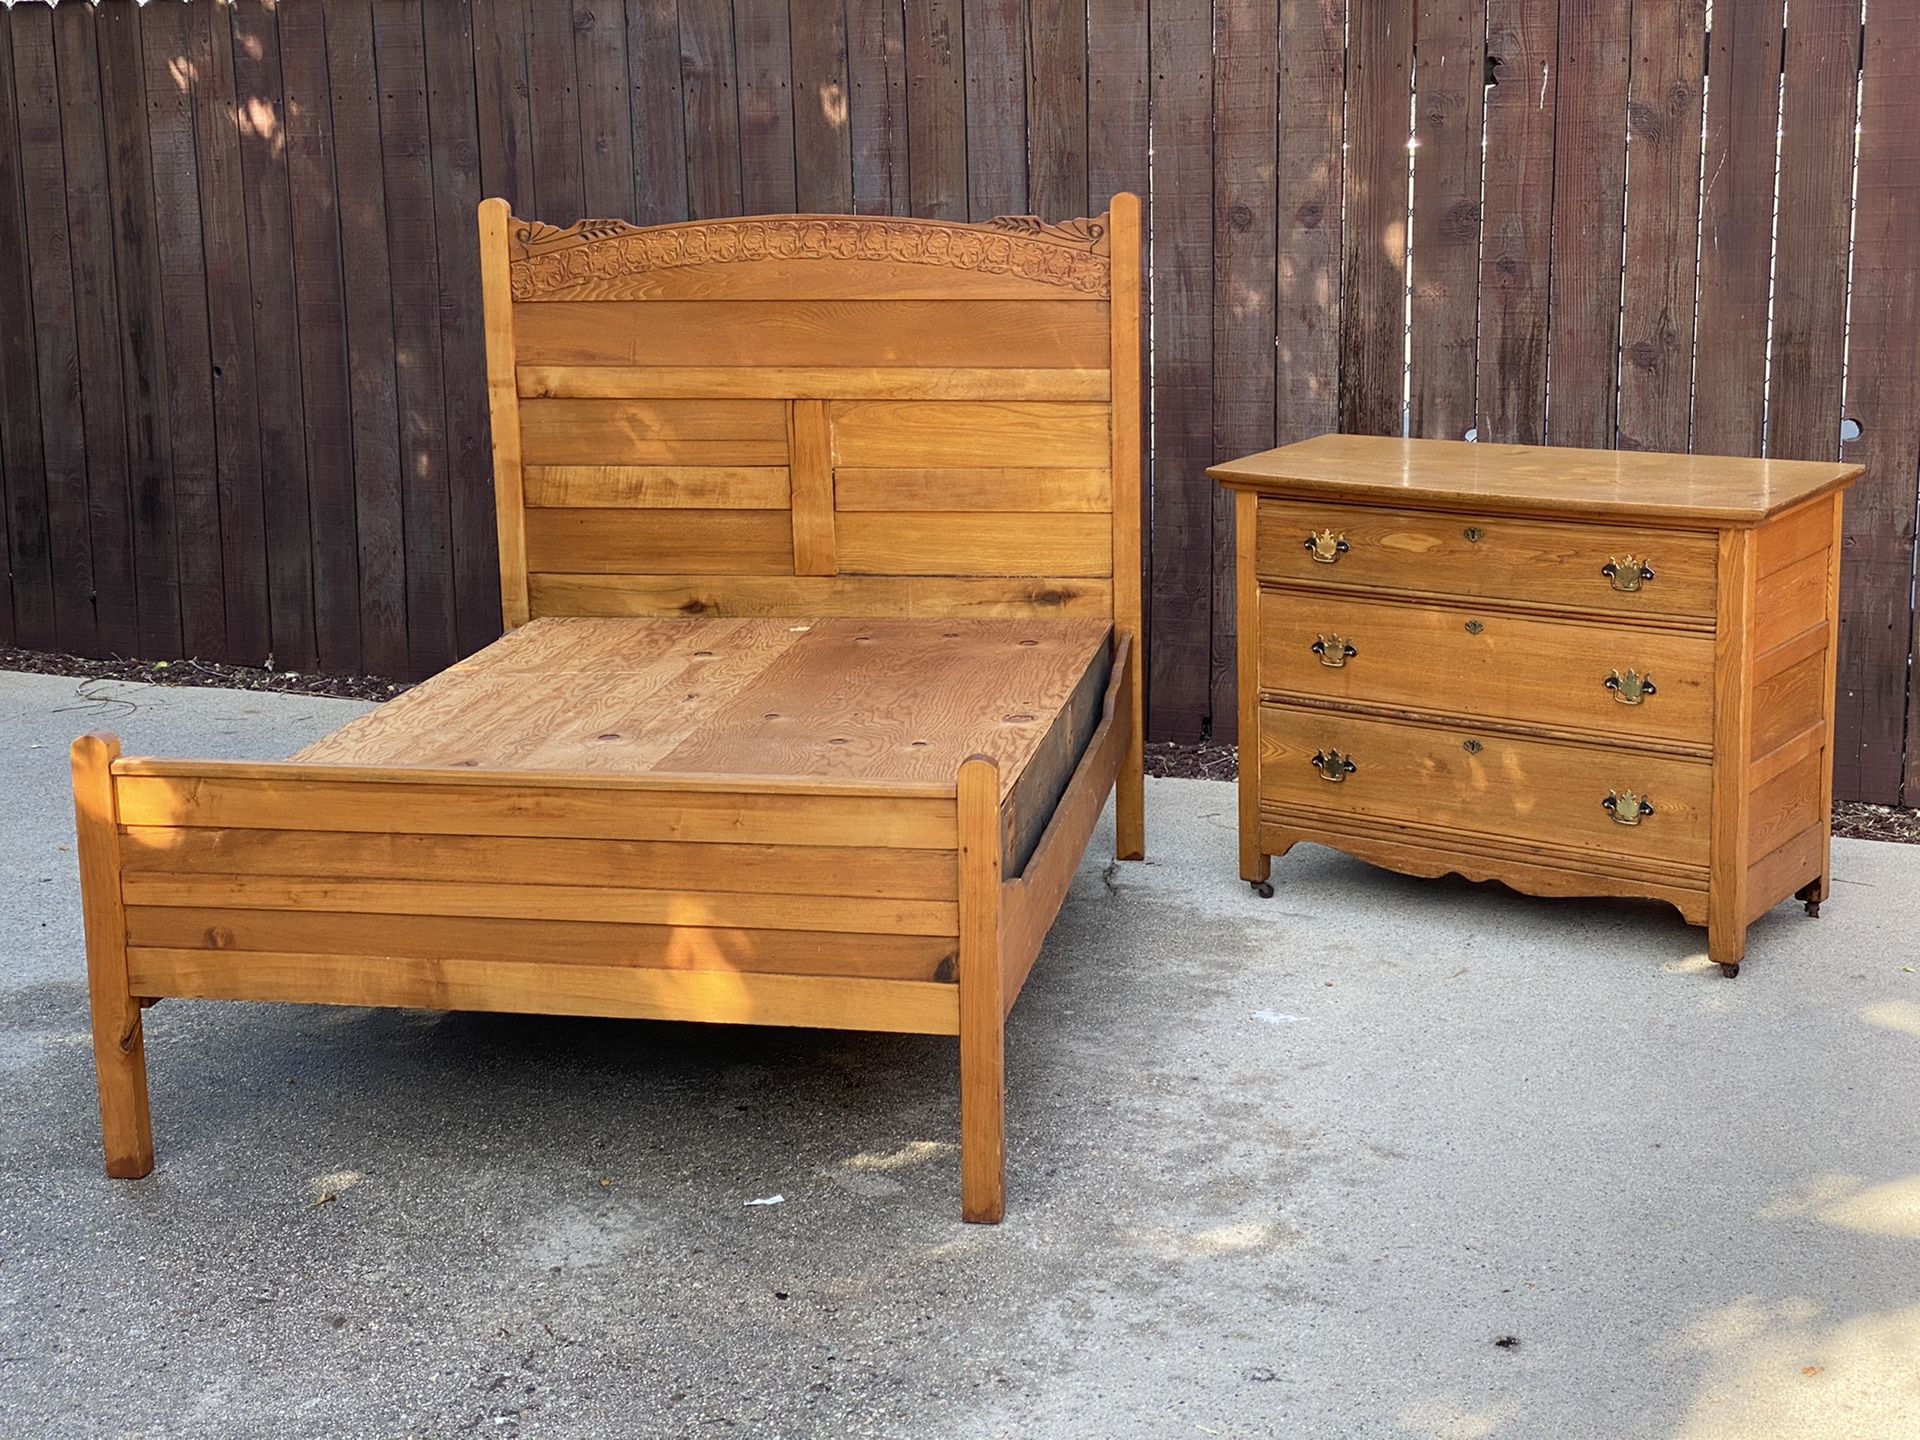 Solid wood full sized bed frame and matching dresser